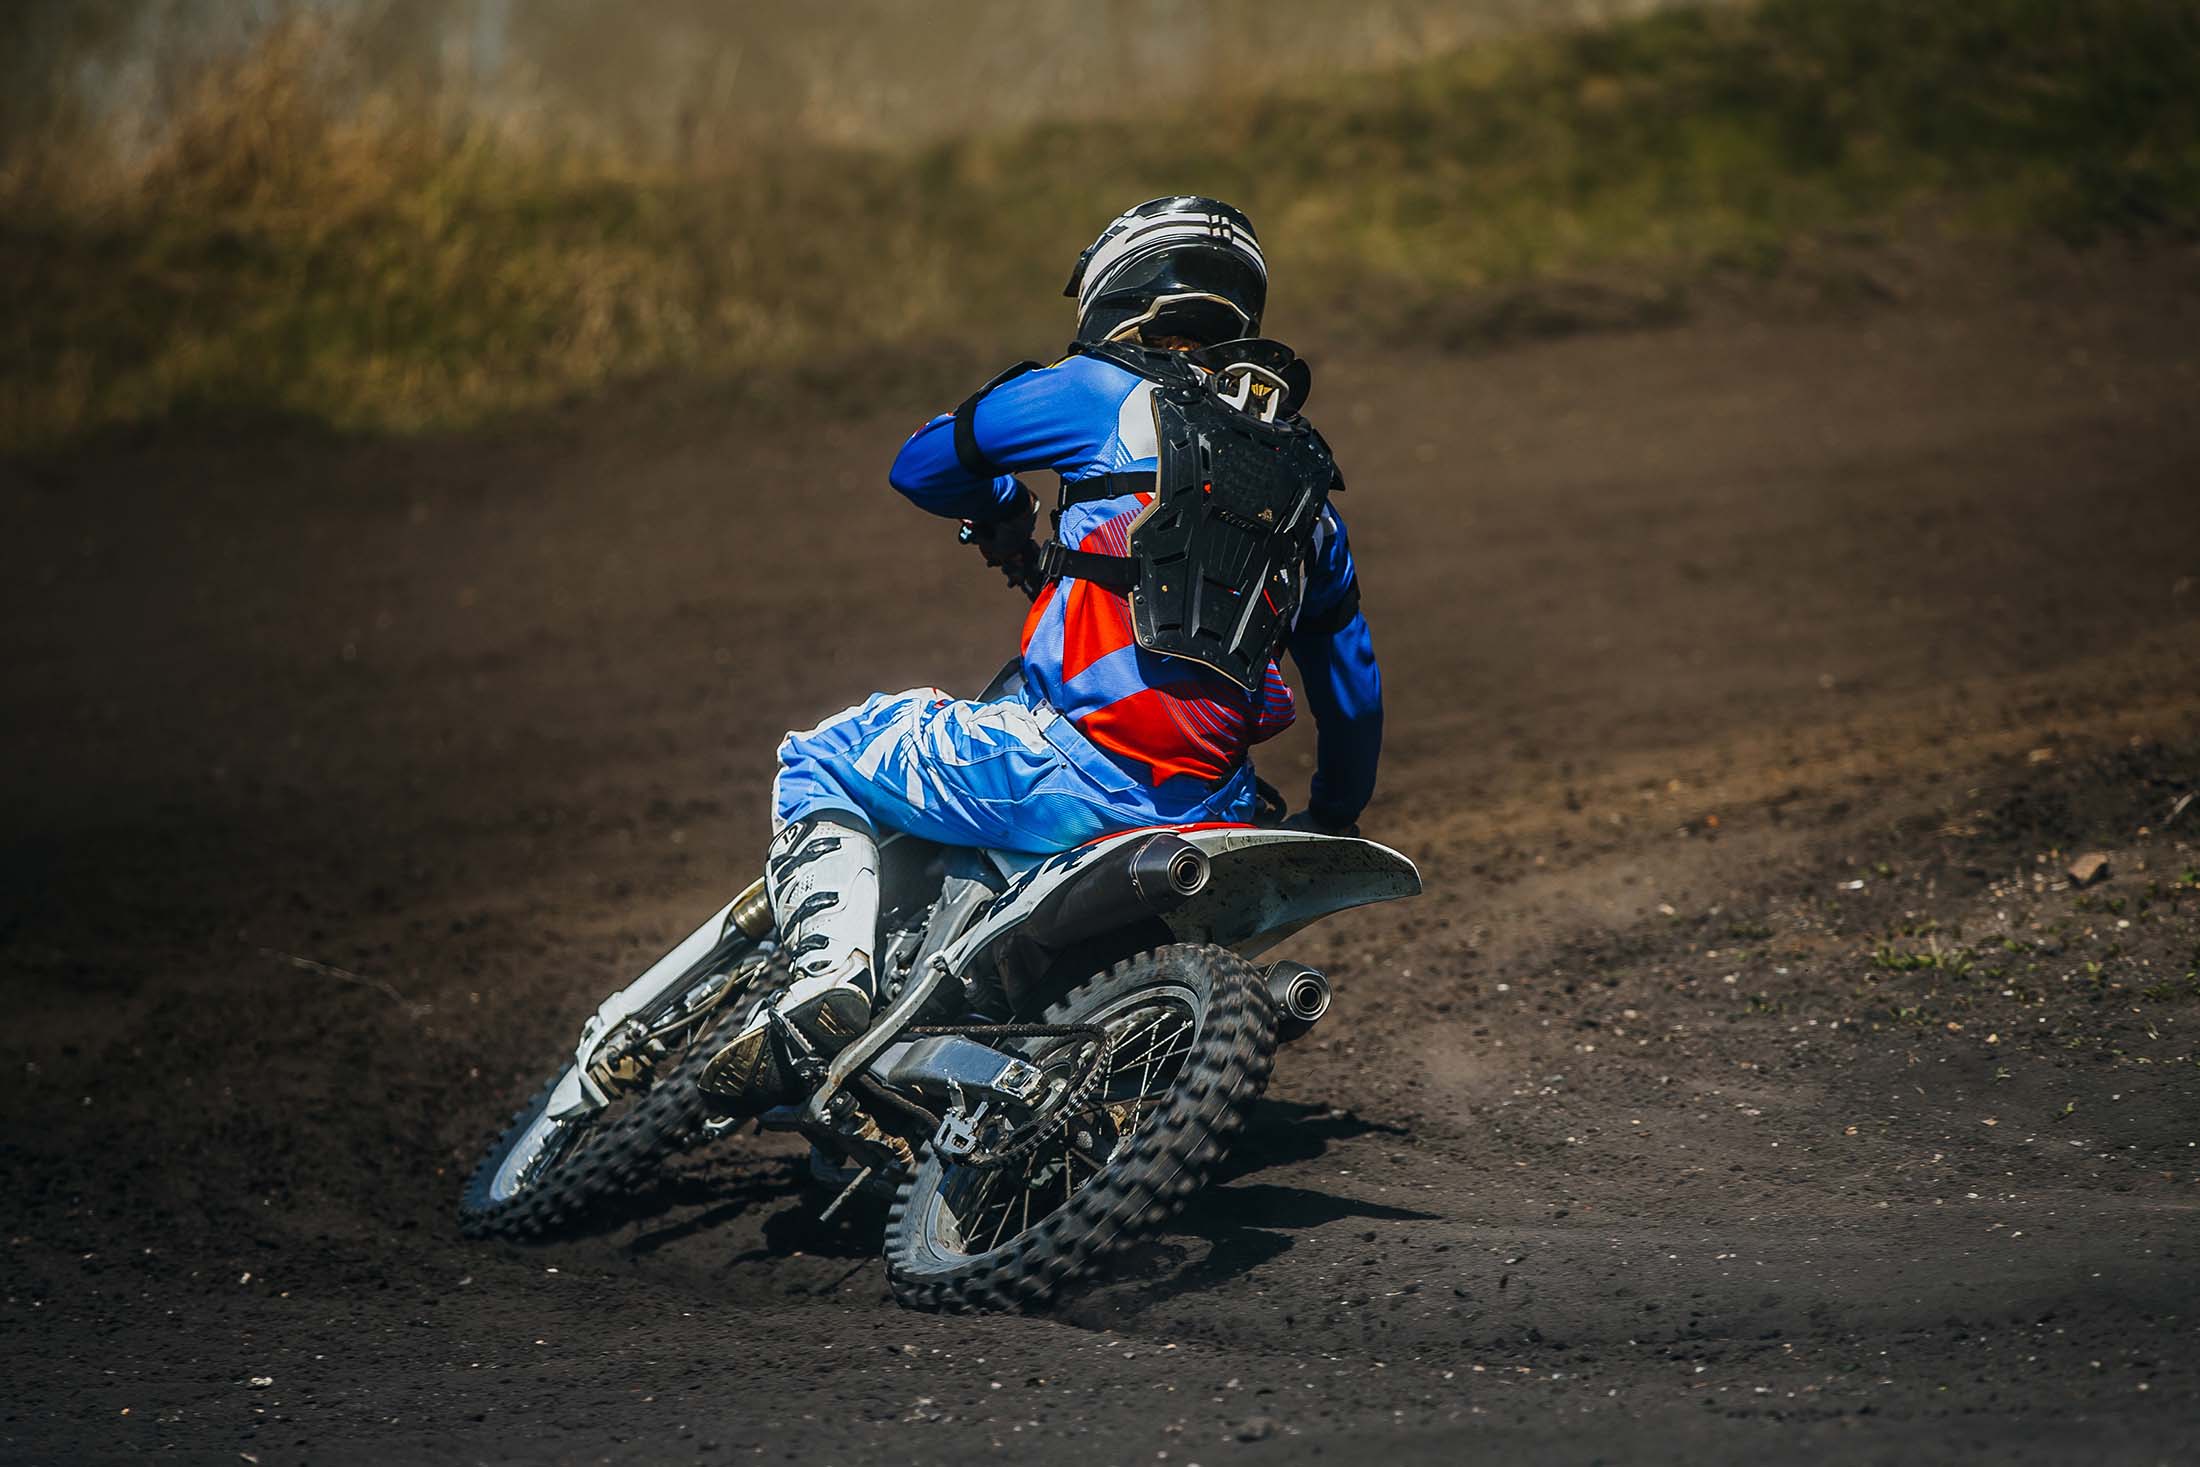 motorcycle racer on a motorcycle rides in turn a dusty track during competition racing